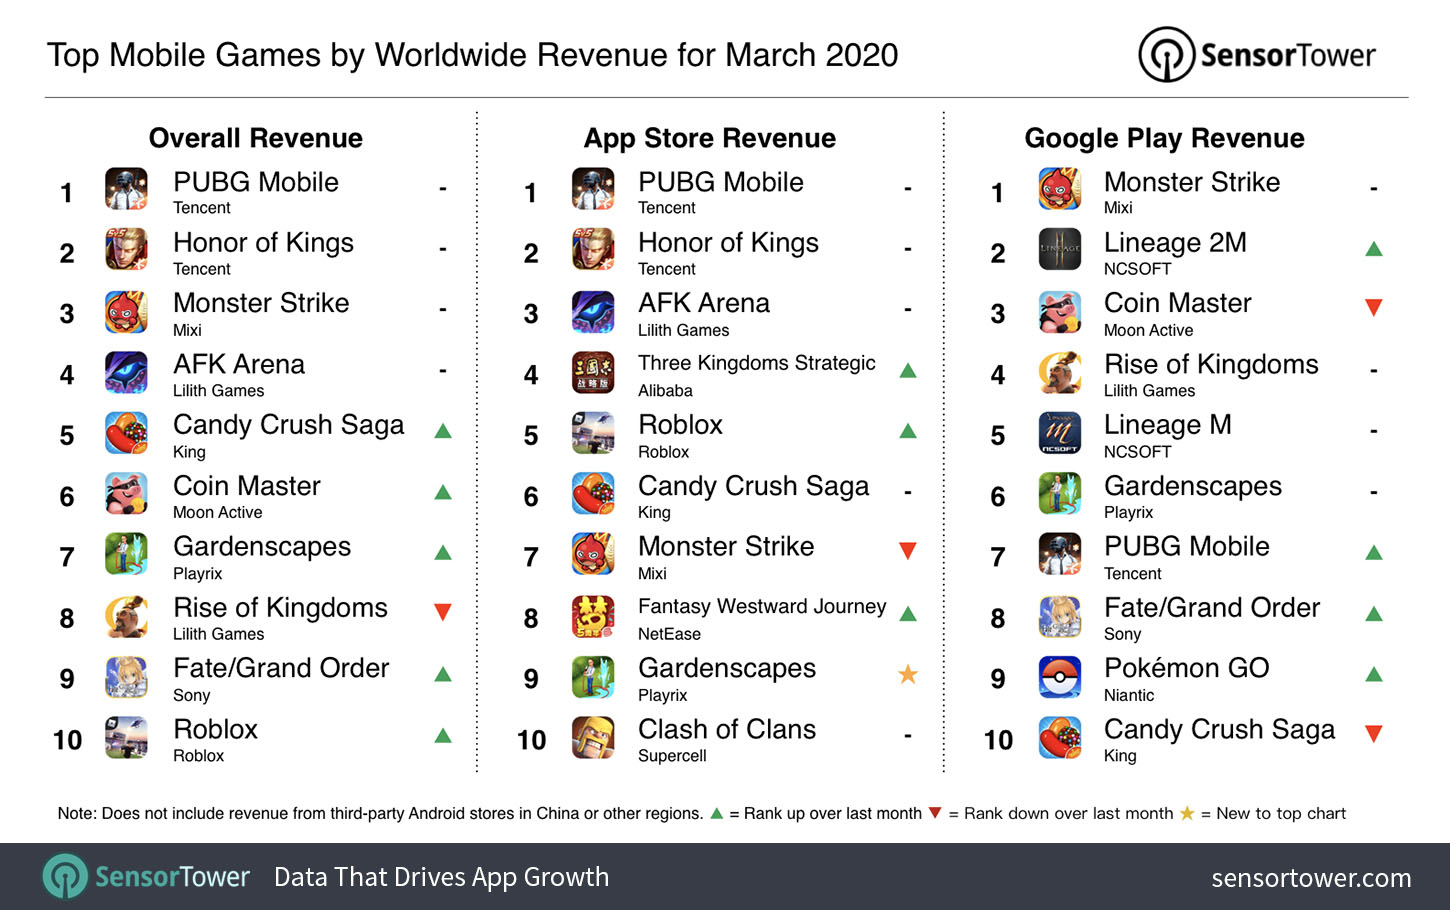 Top Mobile Games Worldwide Revenue for March 2020